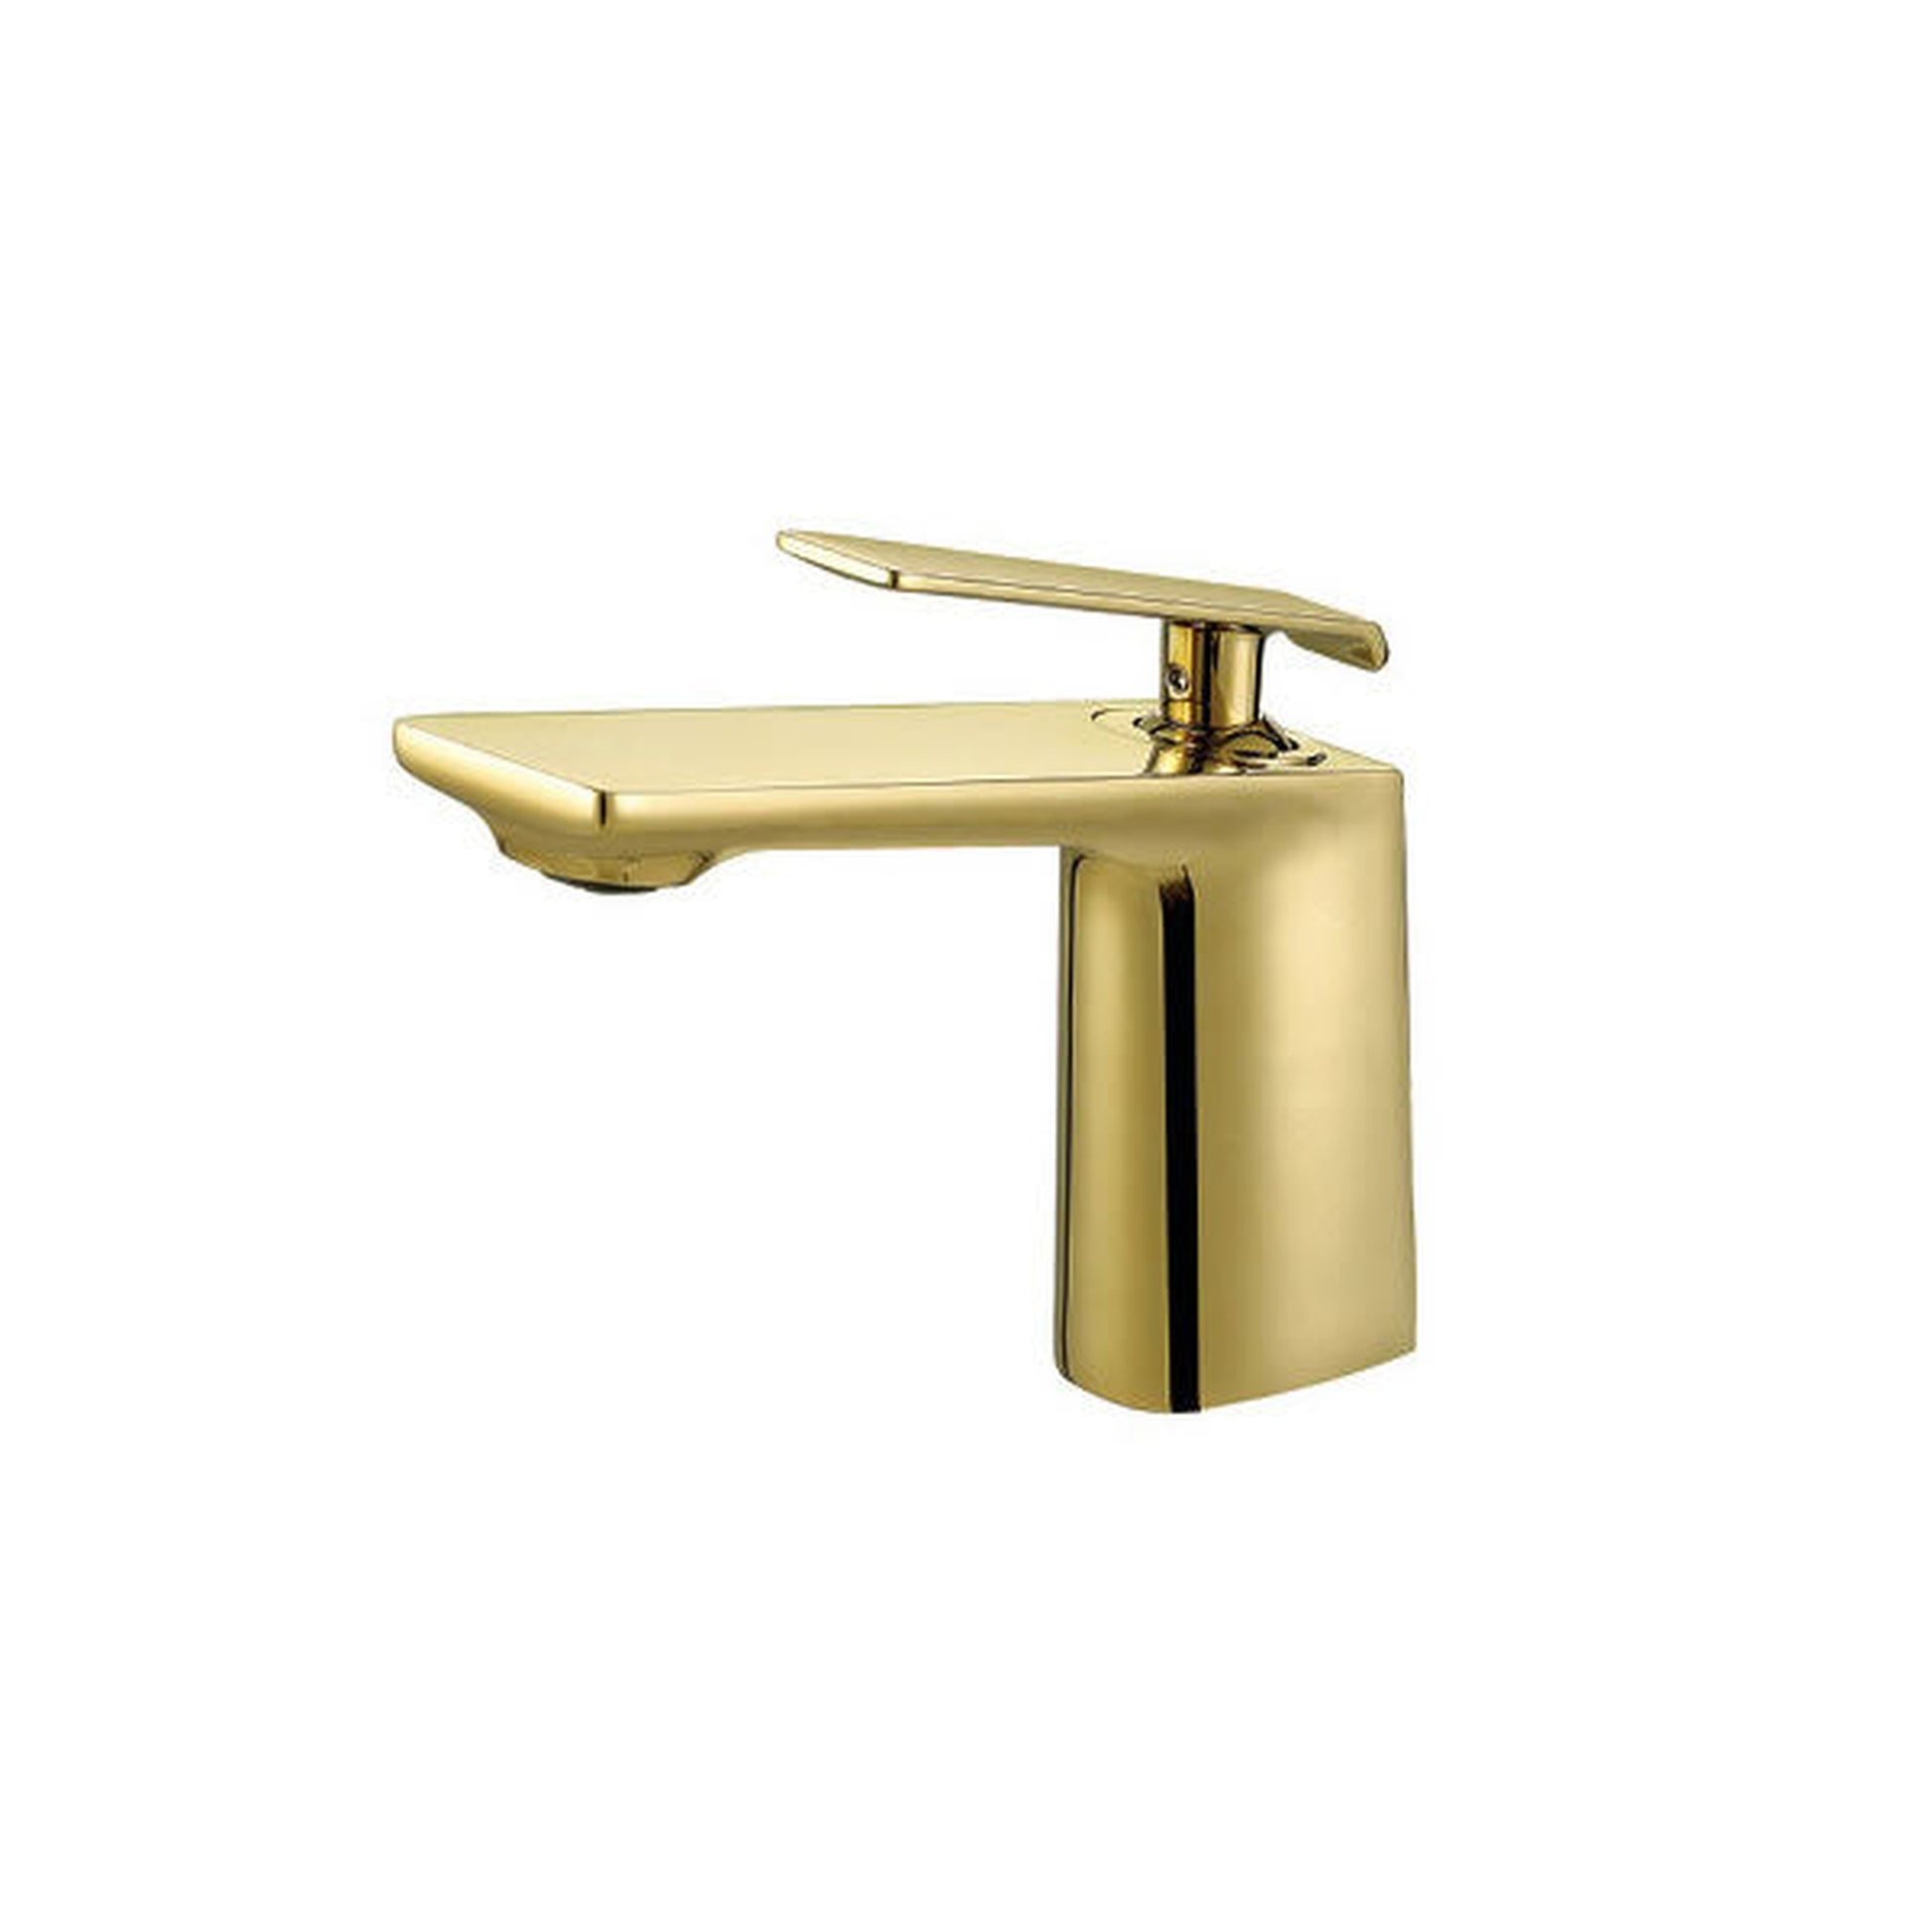 BNK BFB5103SB Satin Brass Single Handle Lavatory Faucet With Single-Hole Mounted